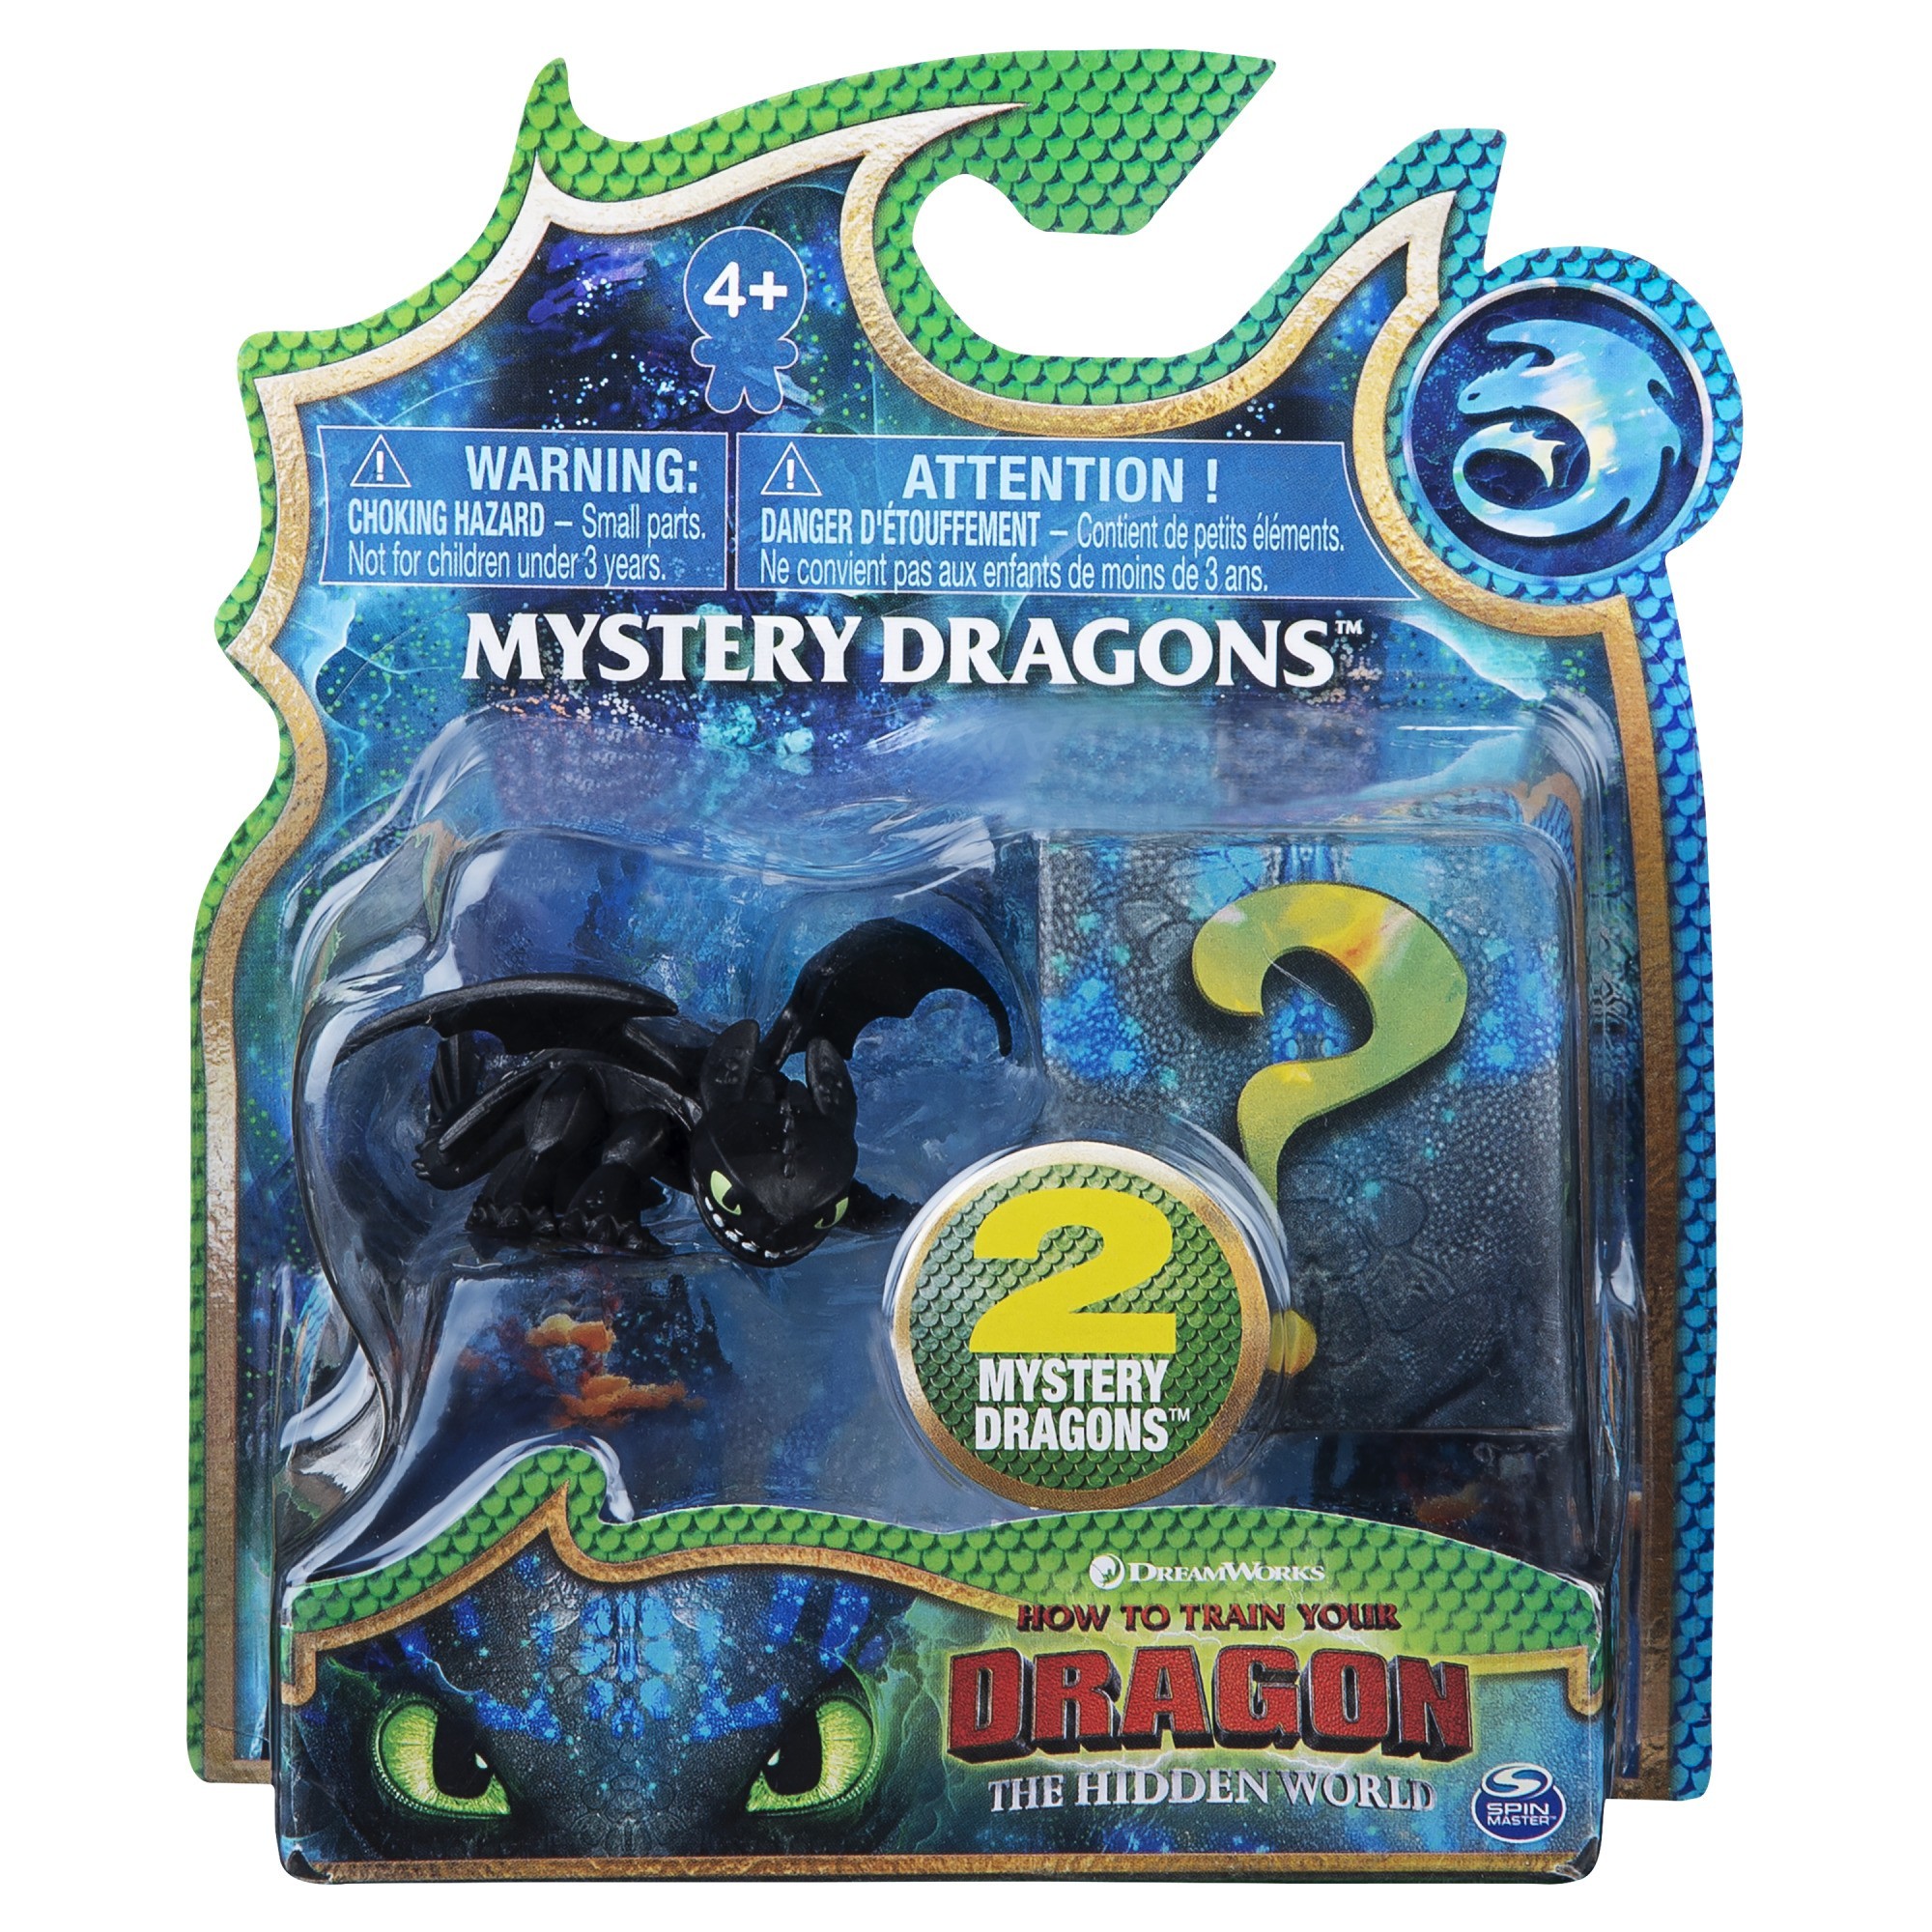 How to Train Your Dragon 3 Mystery Dragons 2 Pack Asst ...